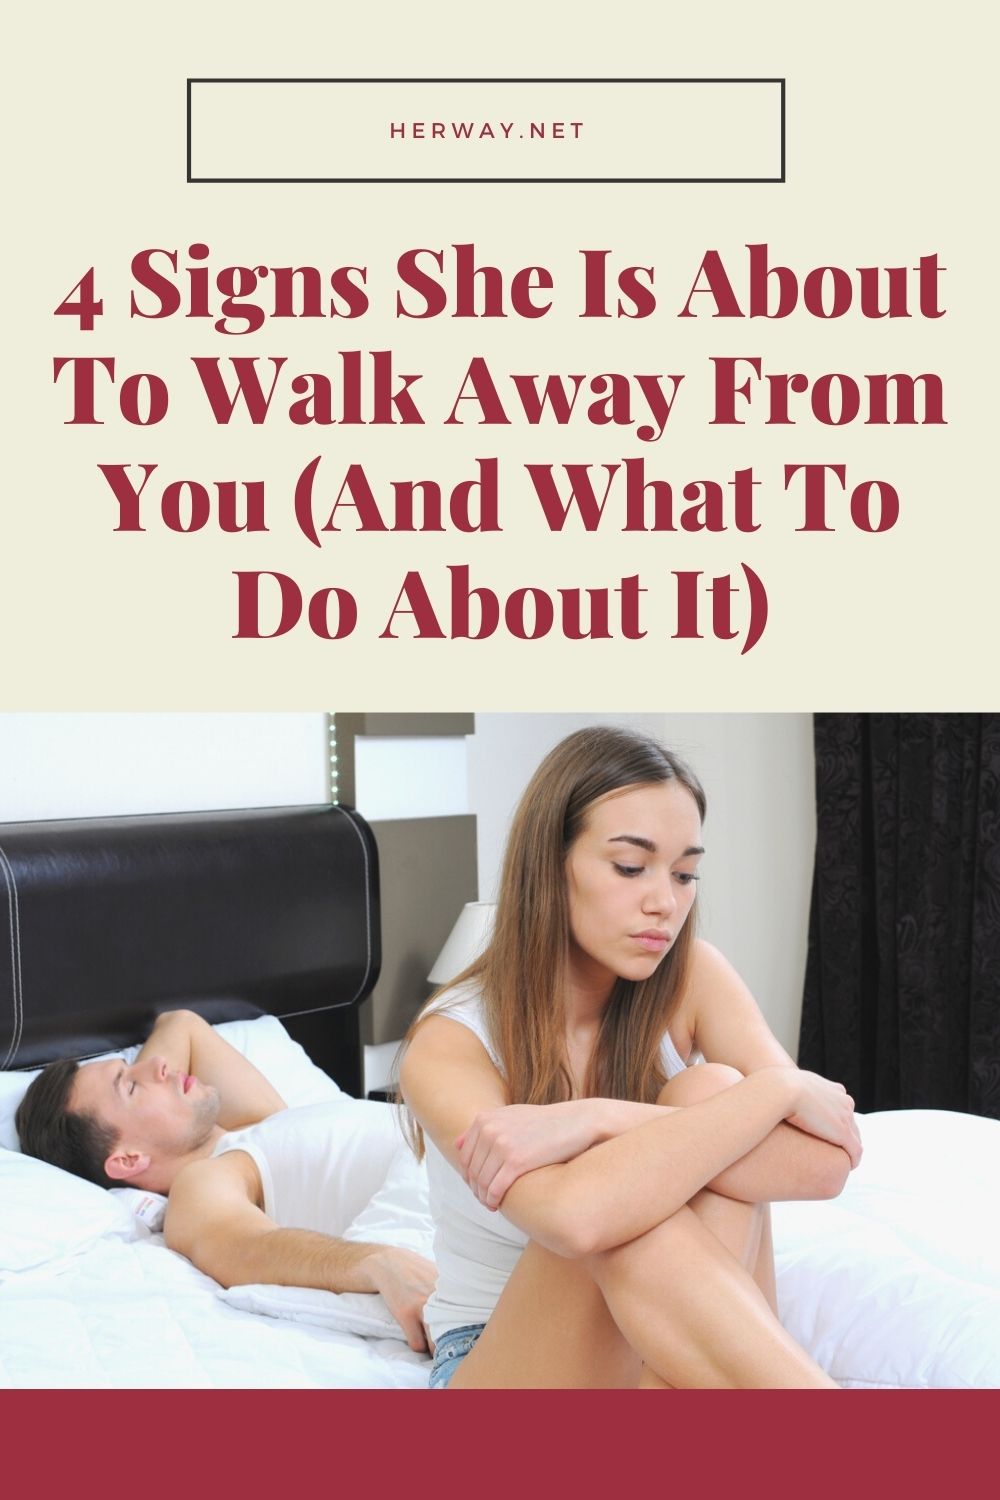 4 Signs She Is About To Walk Away From You (And What To Do About It)